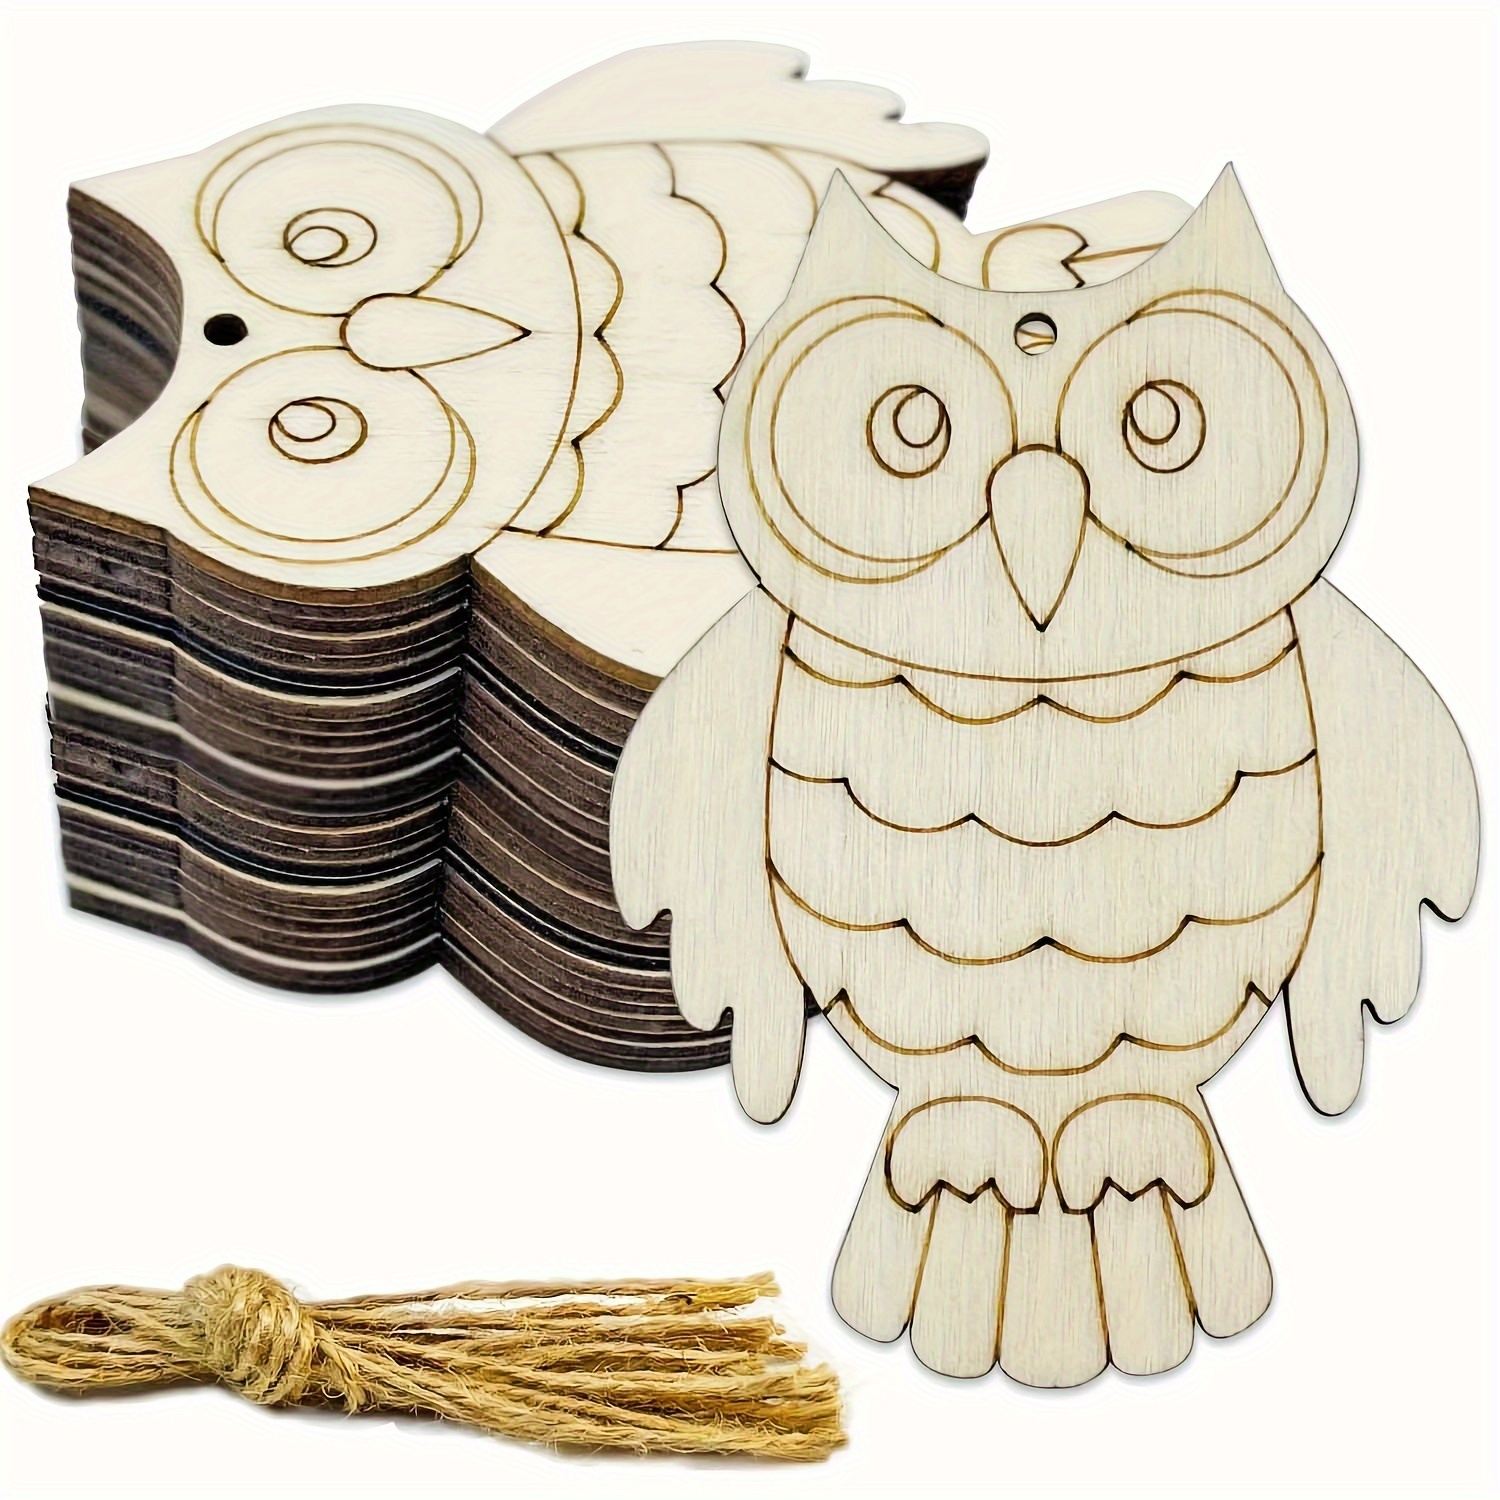 

Value Pack 30pcs Owl Wood Cut Out Owl Wood Diy Crafts Cutouts Blank Wooden Owl Shaped Ornaments With Hole Hemp Ropes Gift Tags For Wedding Birthday Christmas Party Decorations